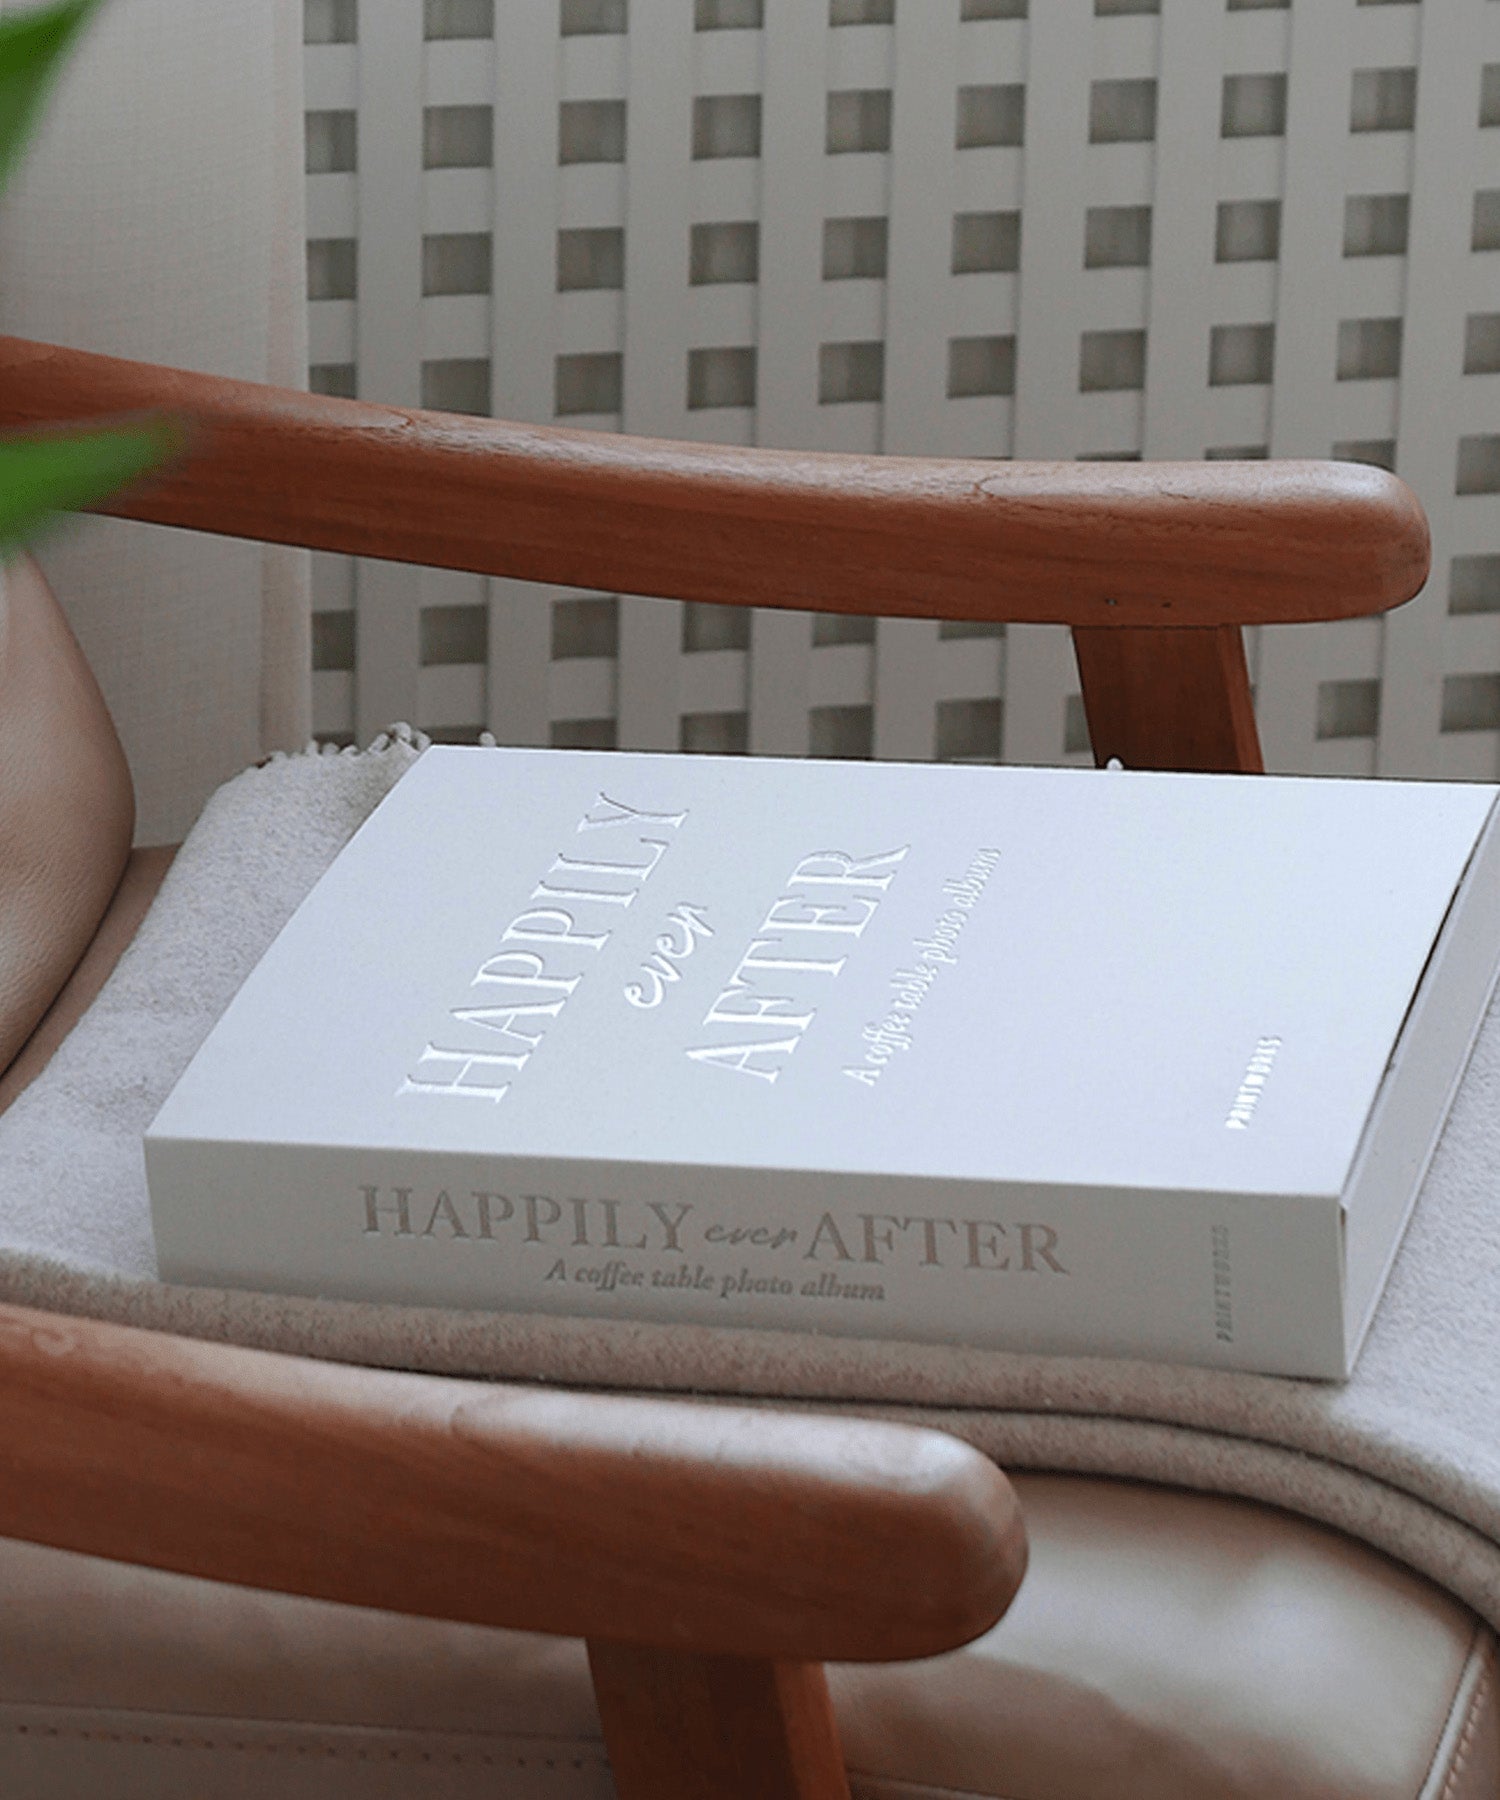 Happily Ever After, Photo Album - Stephenson House